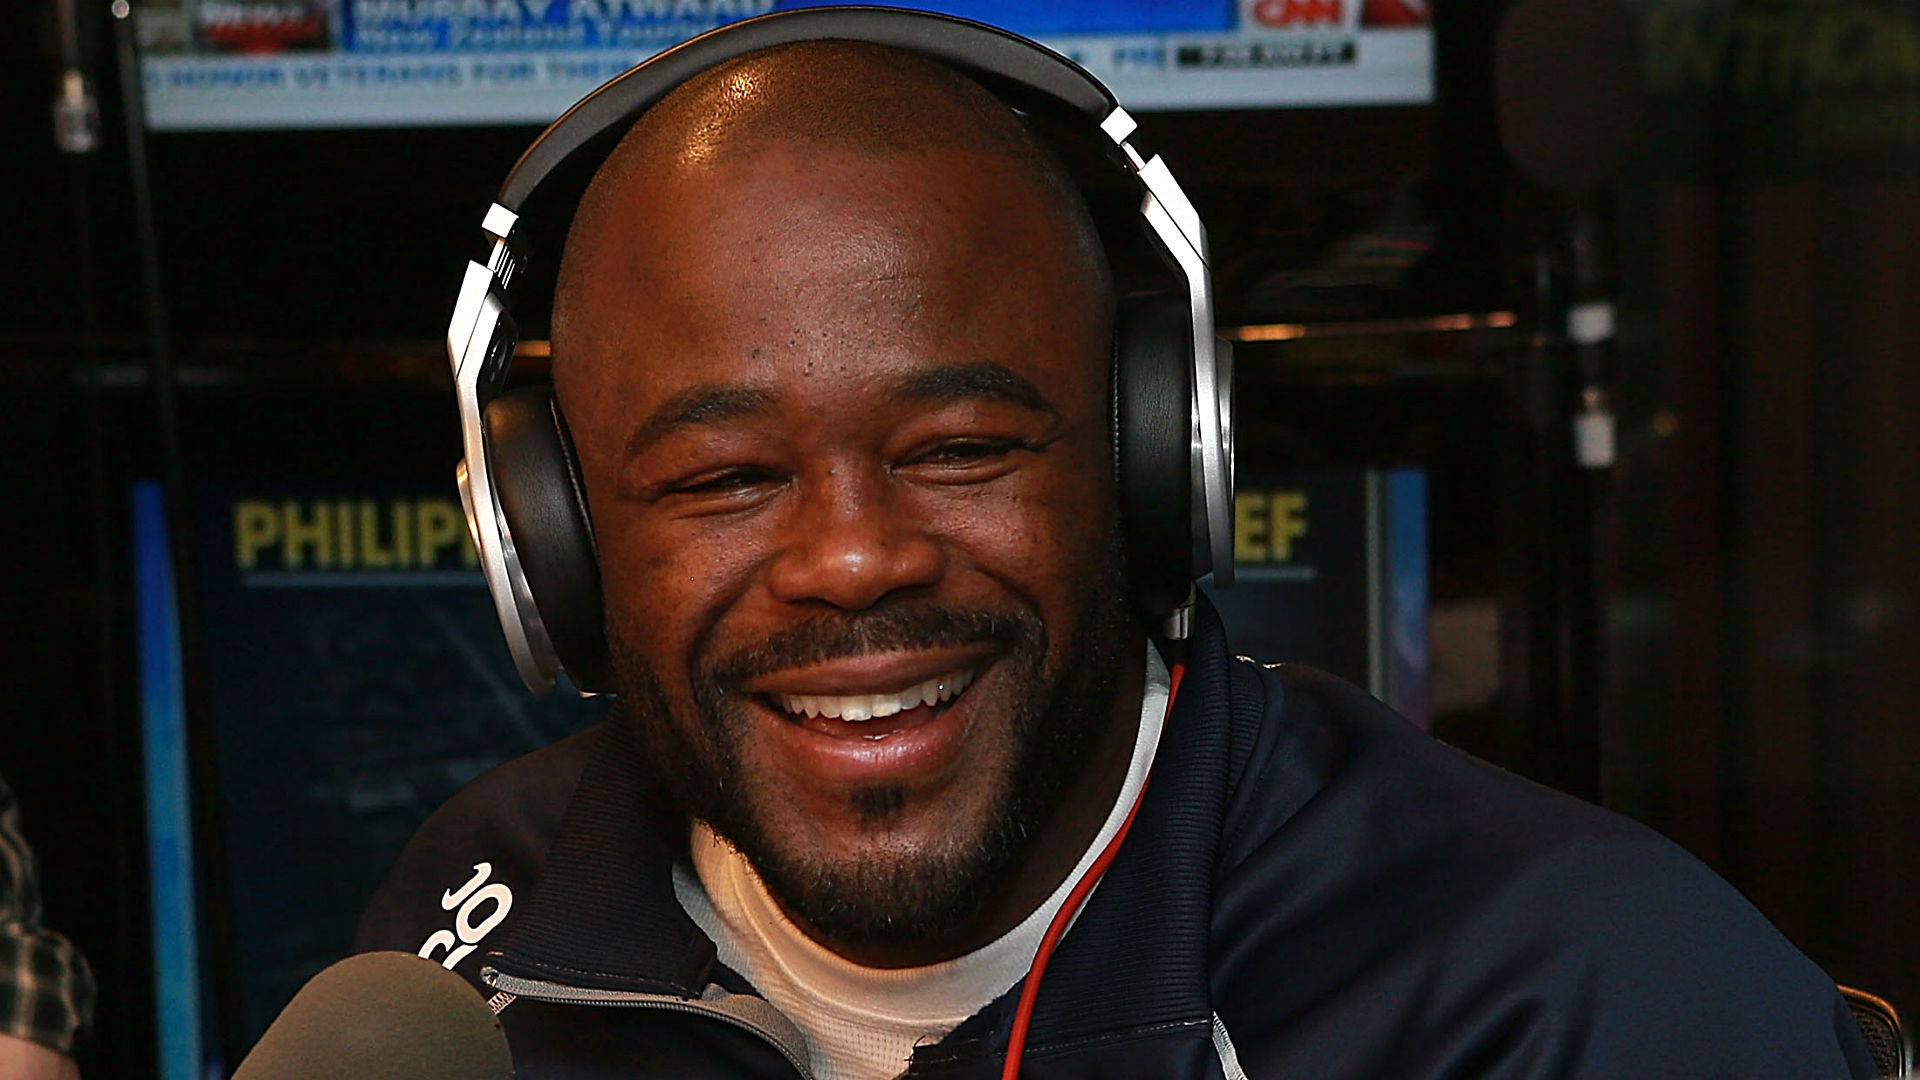 Rashad Evans to be inducted into the UFC Hall Of Fame - Planet MMA1920 x 1080